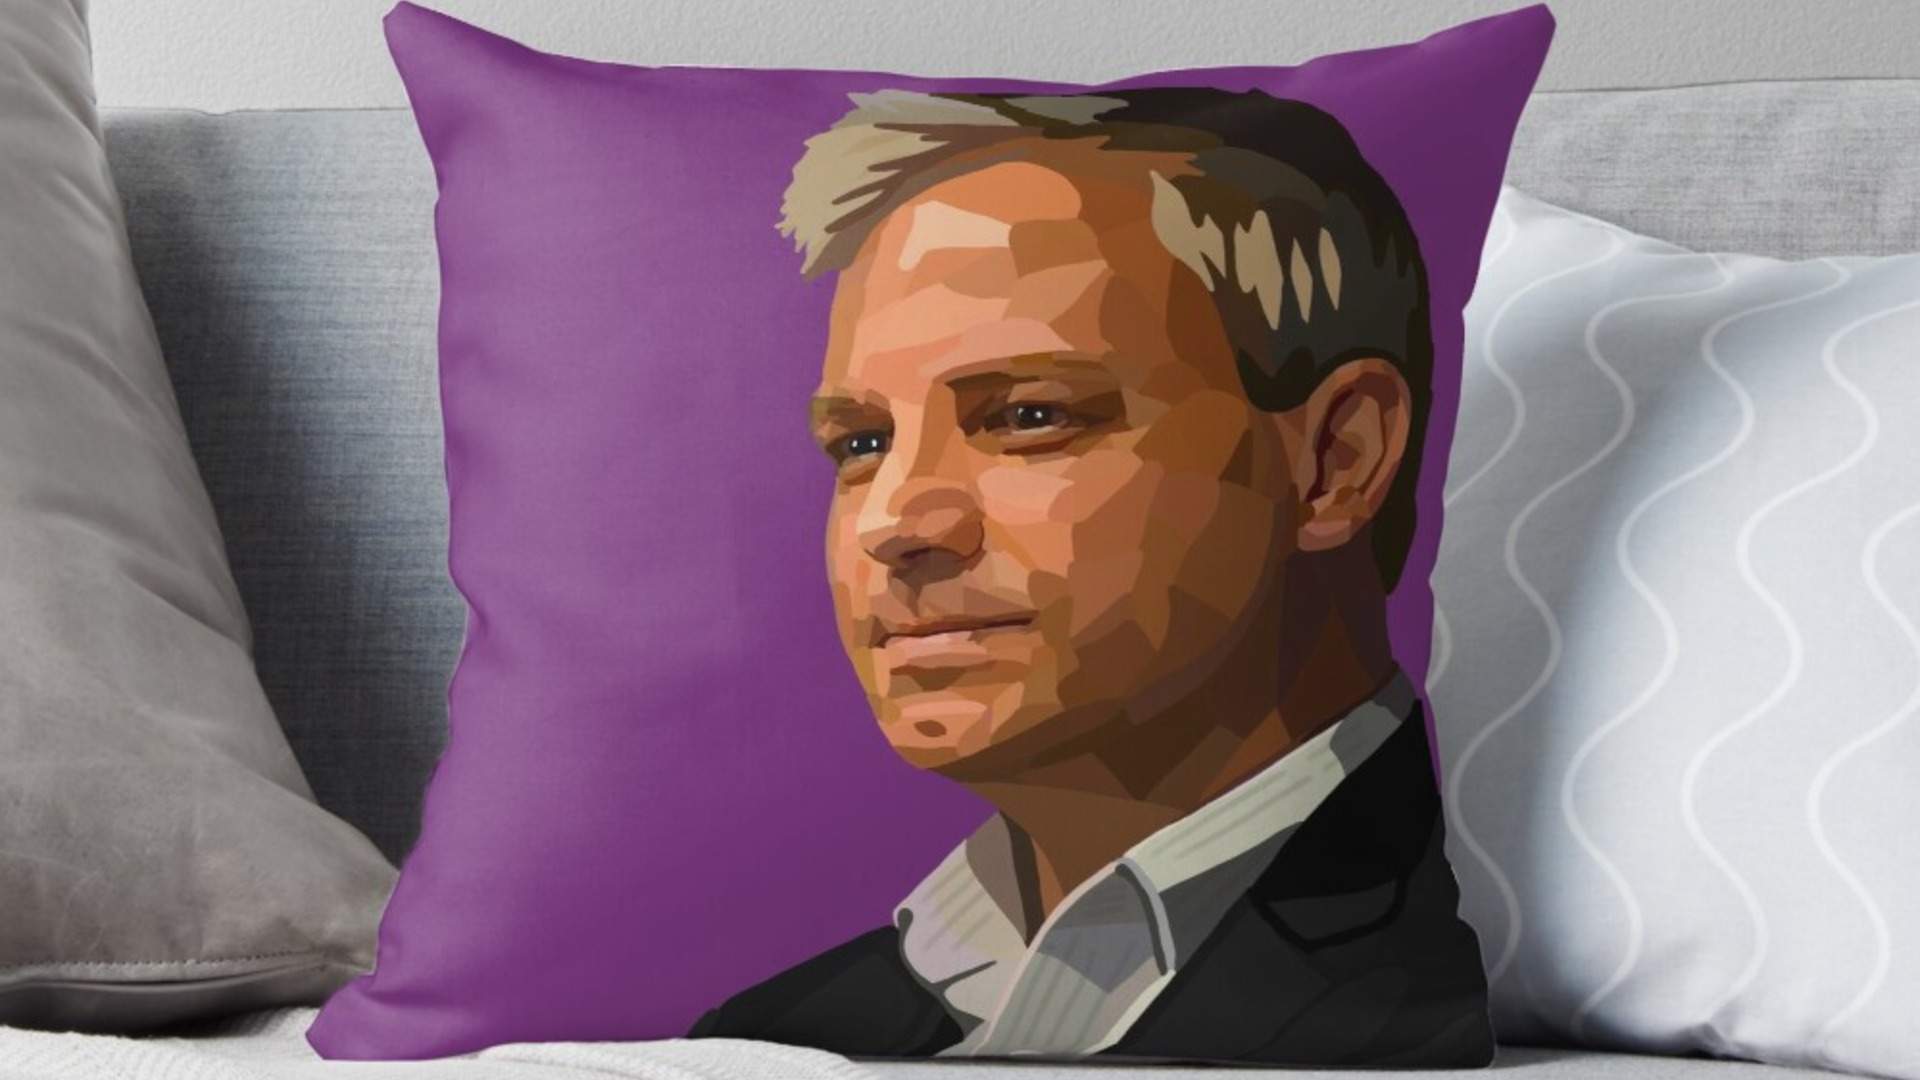 You Can Now Buy Pillows and Blankets Emblazoned with Chief Health Officer Brett Sutton's Face